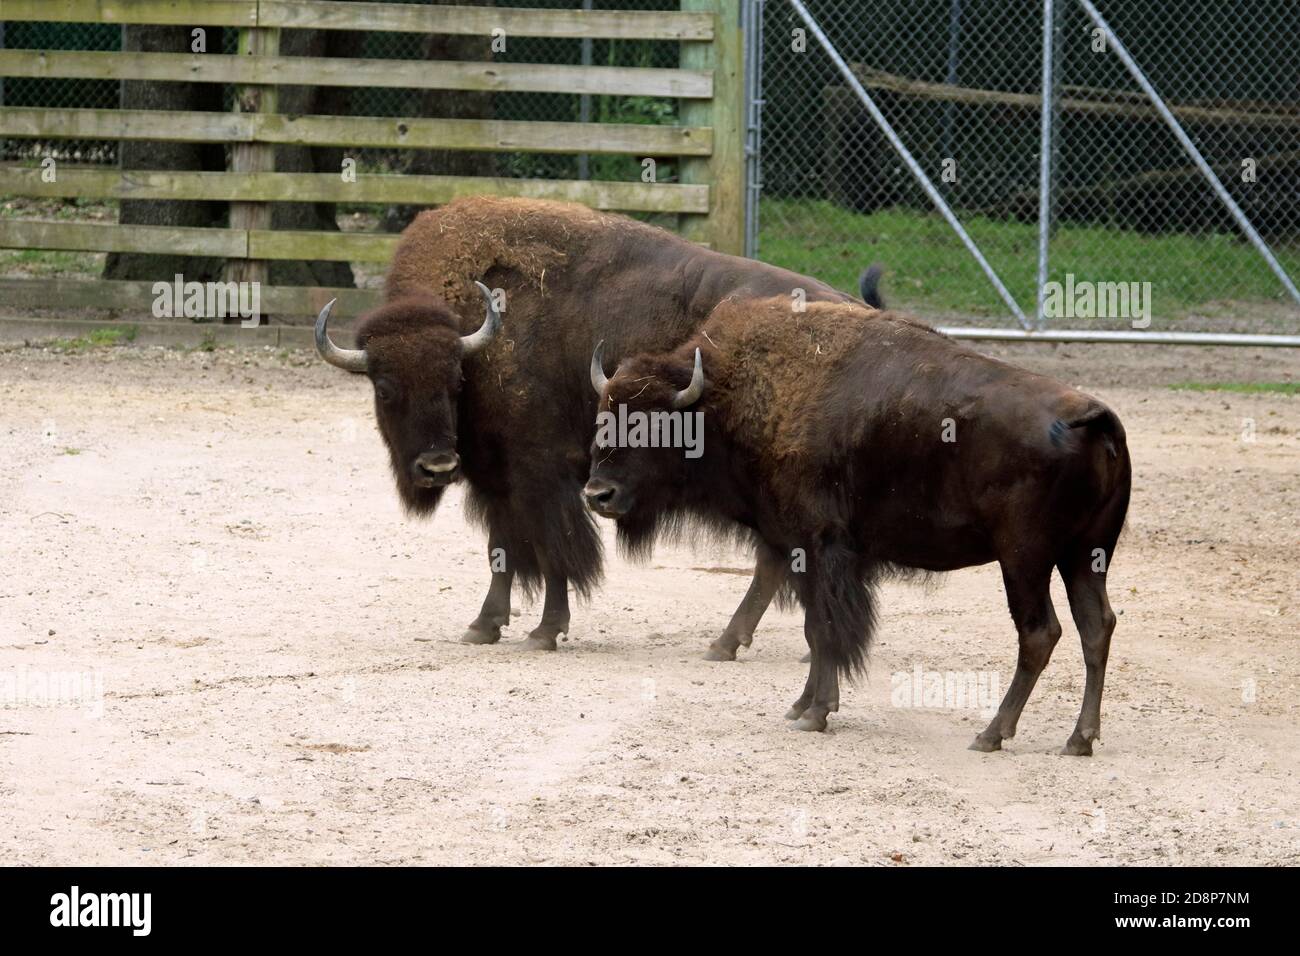 American Bison, Bison bison, at the Cape May County Zoo and Park, New Jersey, USA Stock Photo